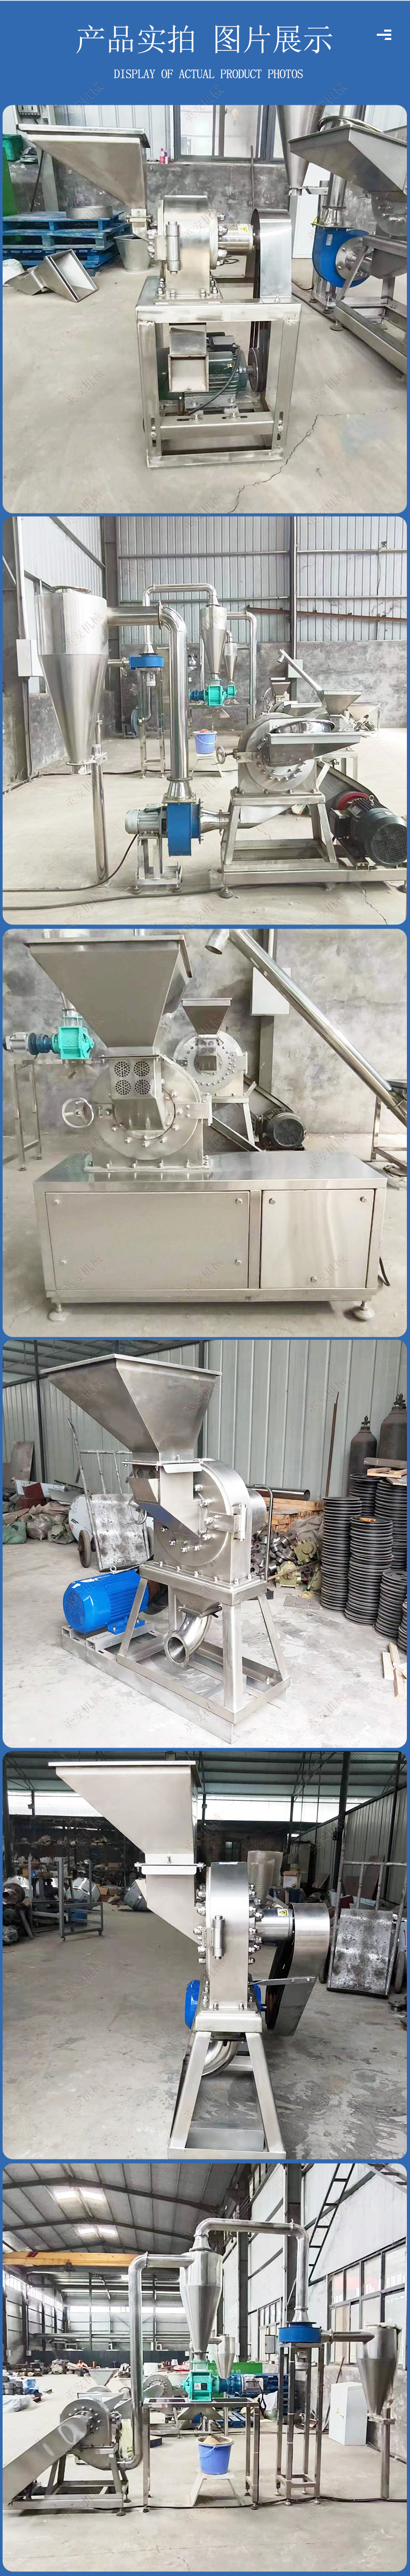 Small white sugar and salt grinding machine, stainless steel toothed claw crusher, five grain and miscellaneous grain dust removal and pulverizing machine